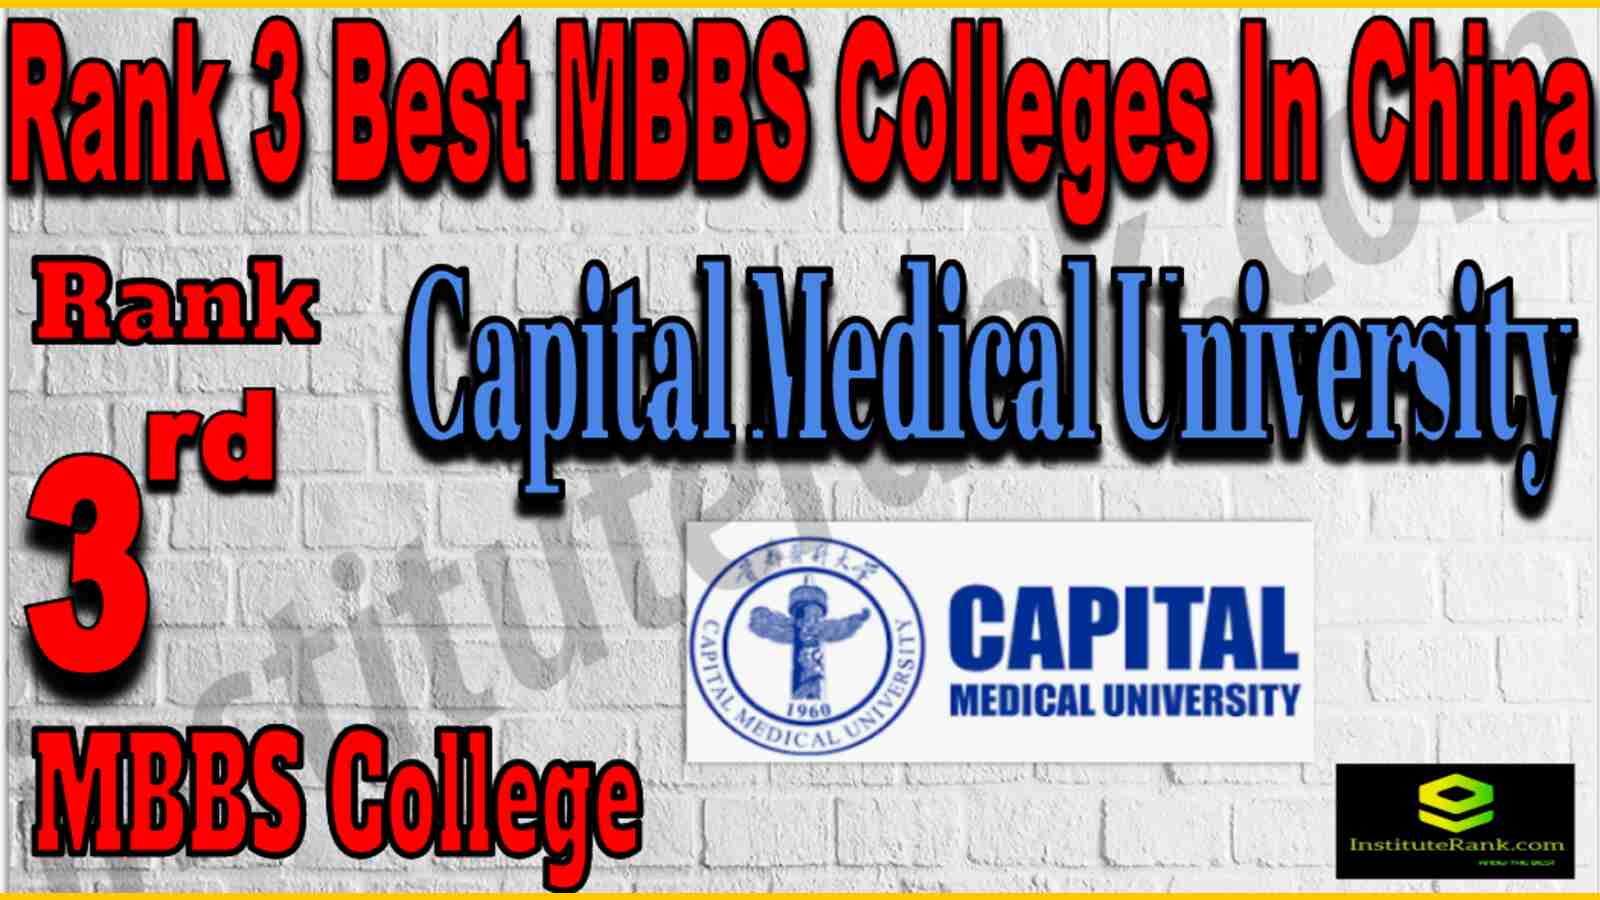 Rank 3 Best MBBS Colleges In China